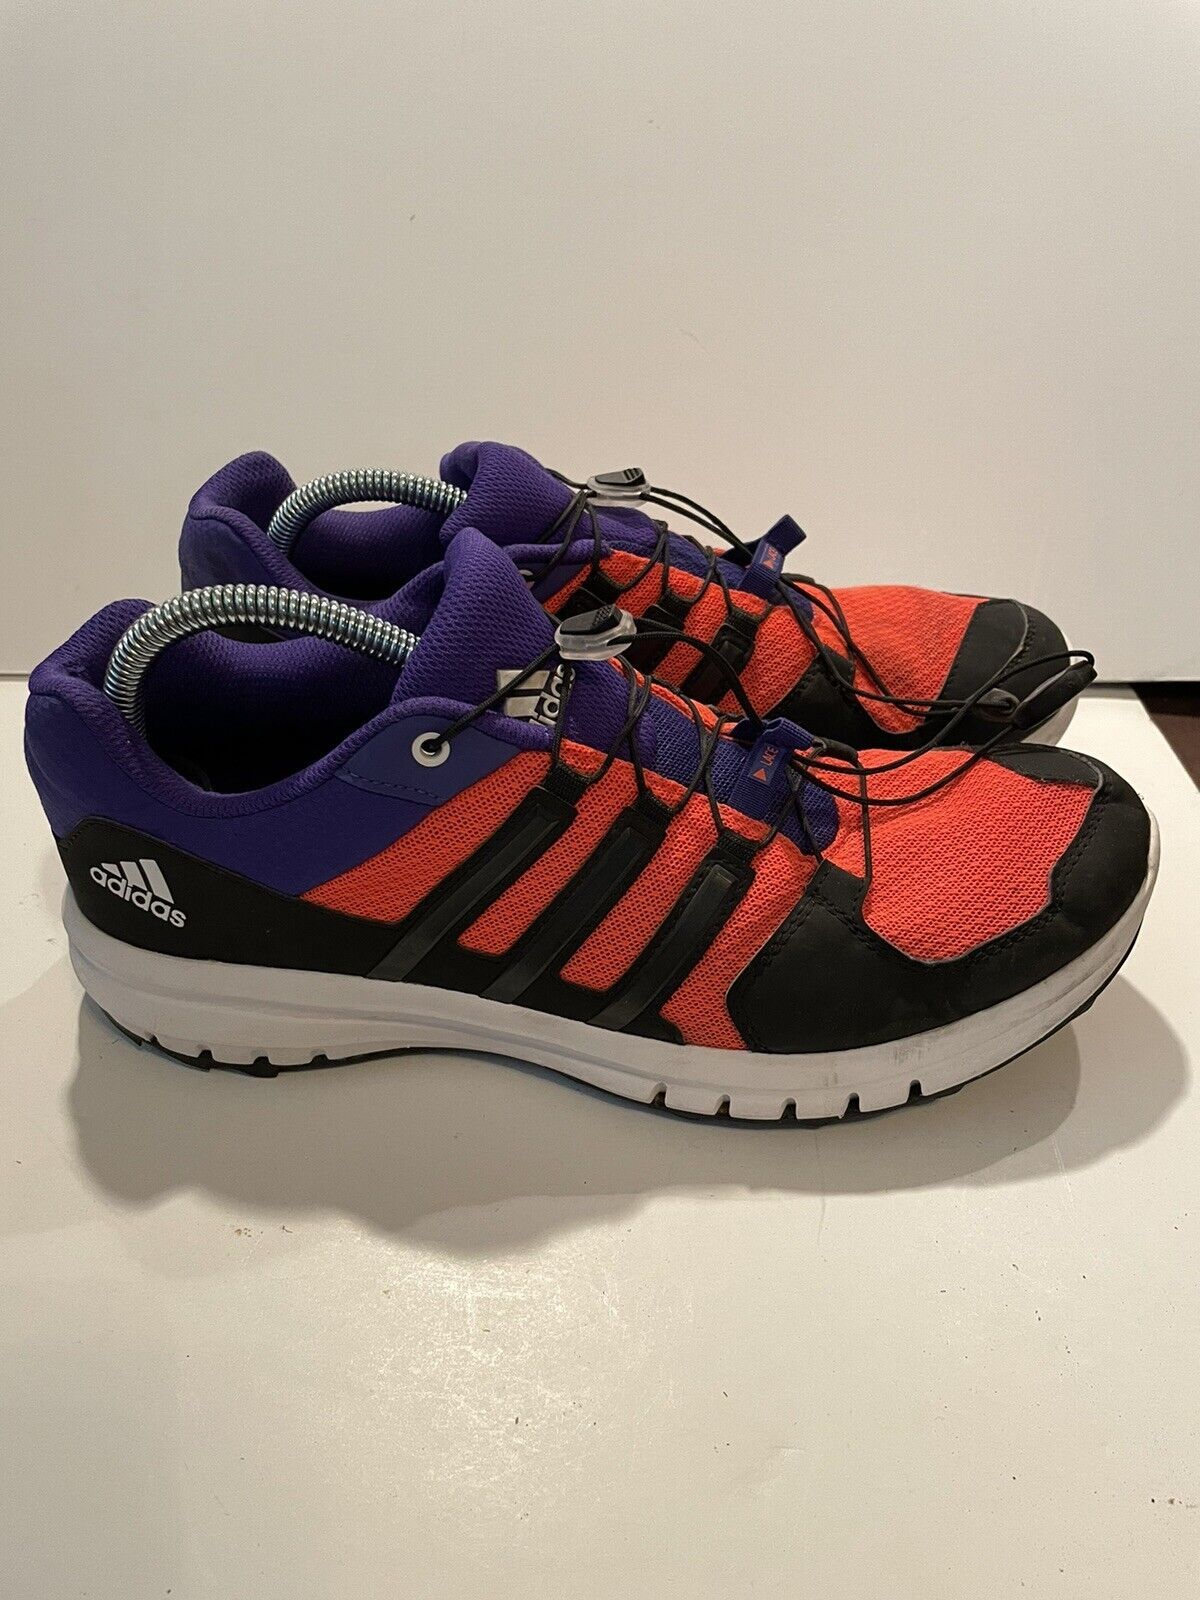 Primary image for Mens Size 11 ADIDAS Duramo Cross Trail B39842 Solar Red Purple Sneakers Shoes